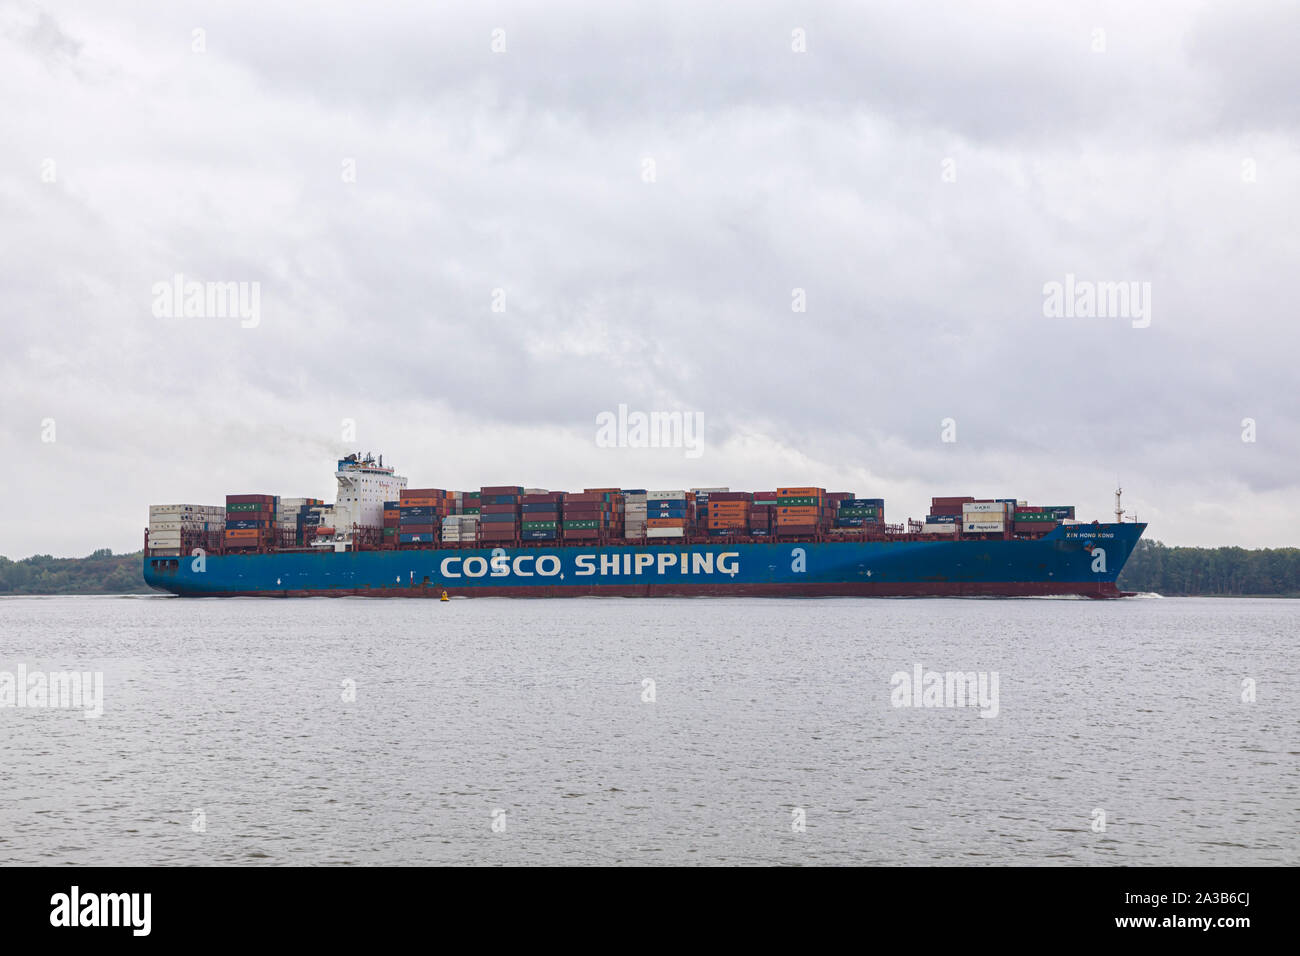 Container ship XIN HONG KONG, owned by China COSCO Shipping Corporation, on Elbe river heading to Hamburg Stock Photo